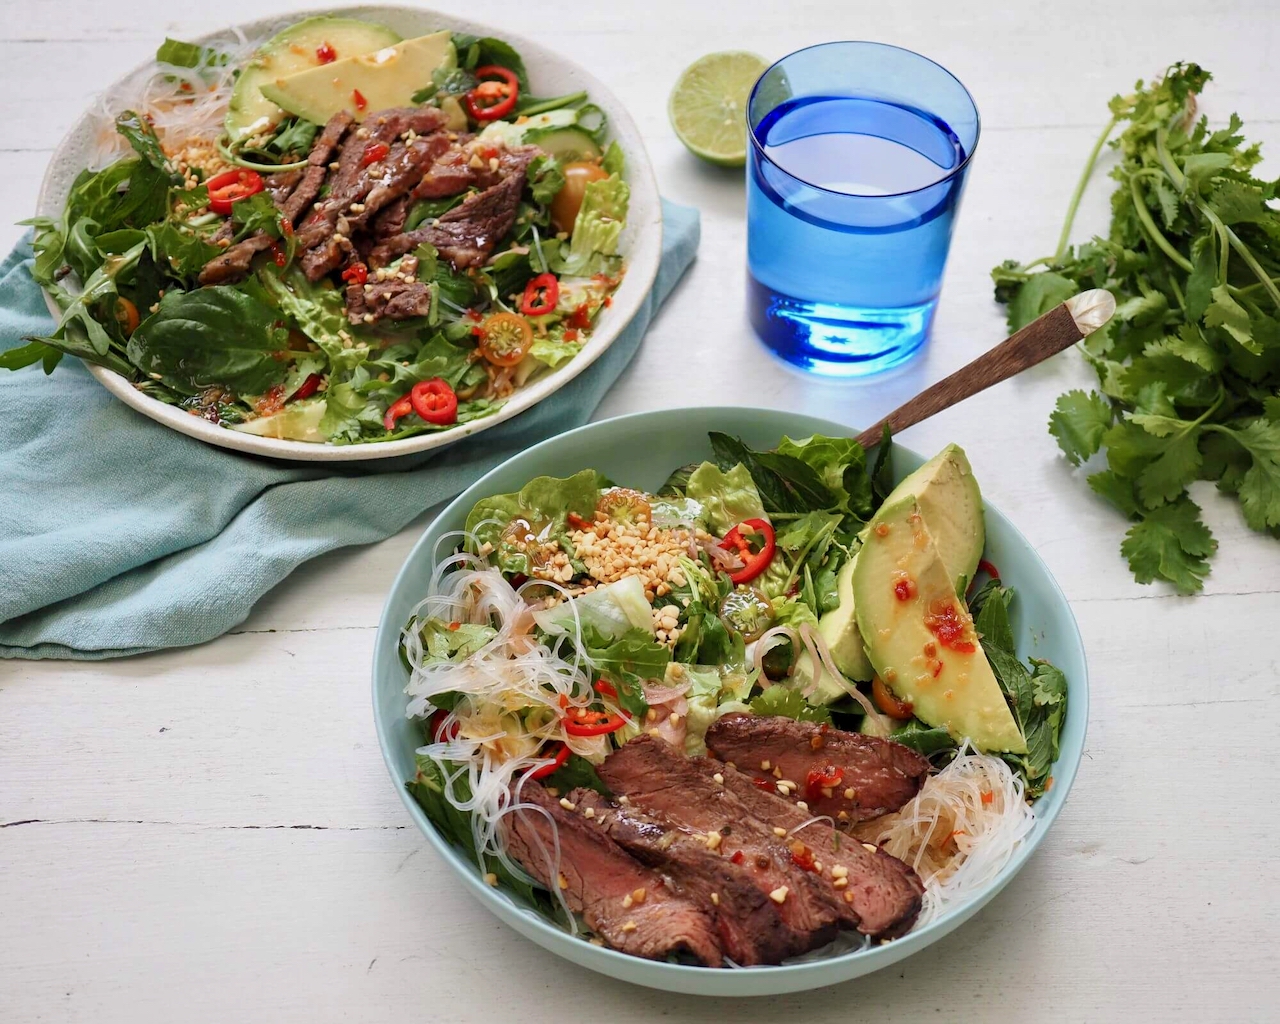 Thai Beef Salad Recipe from Lyndi Cohen - The Nude Nutritionist